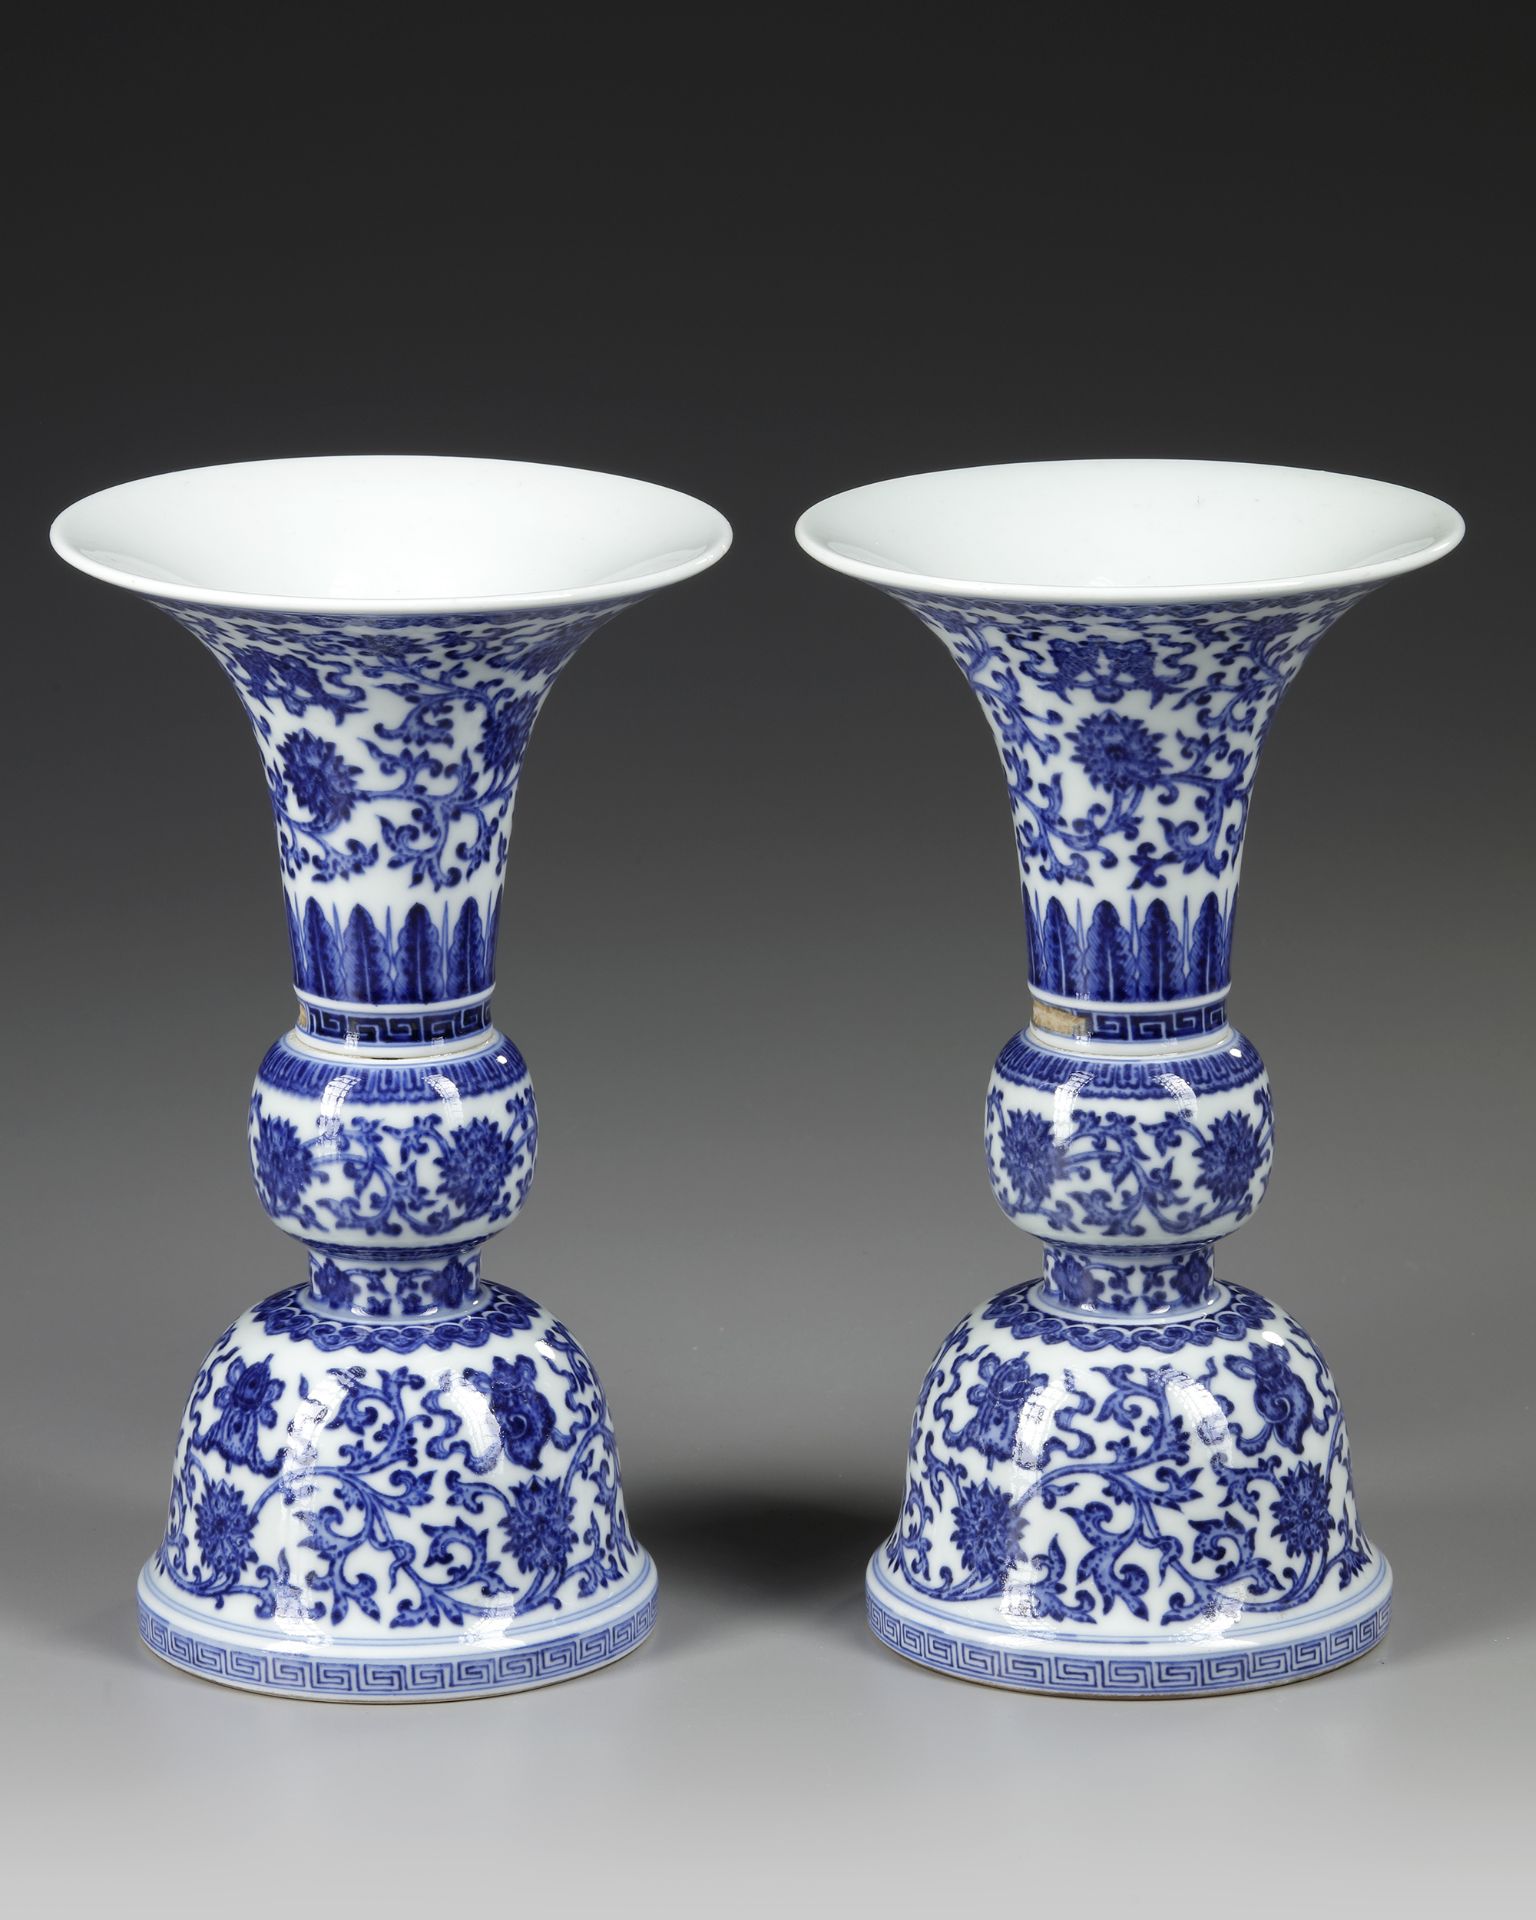 A PAIR OF CHINESE BLUE AND WHITE GU-FORM ALTAR VASES, QING DYNASTY (1644–1911) - Image 3 of 8